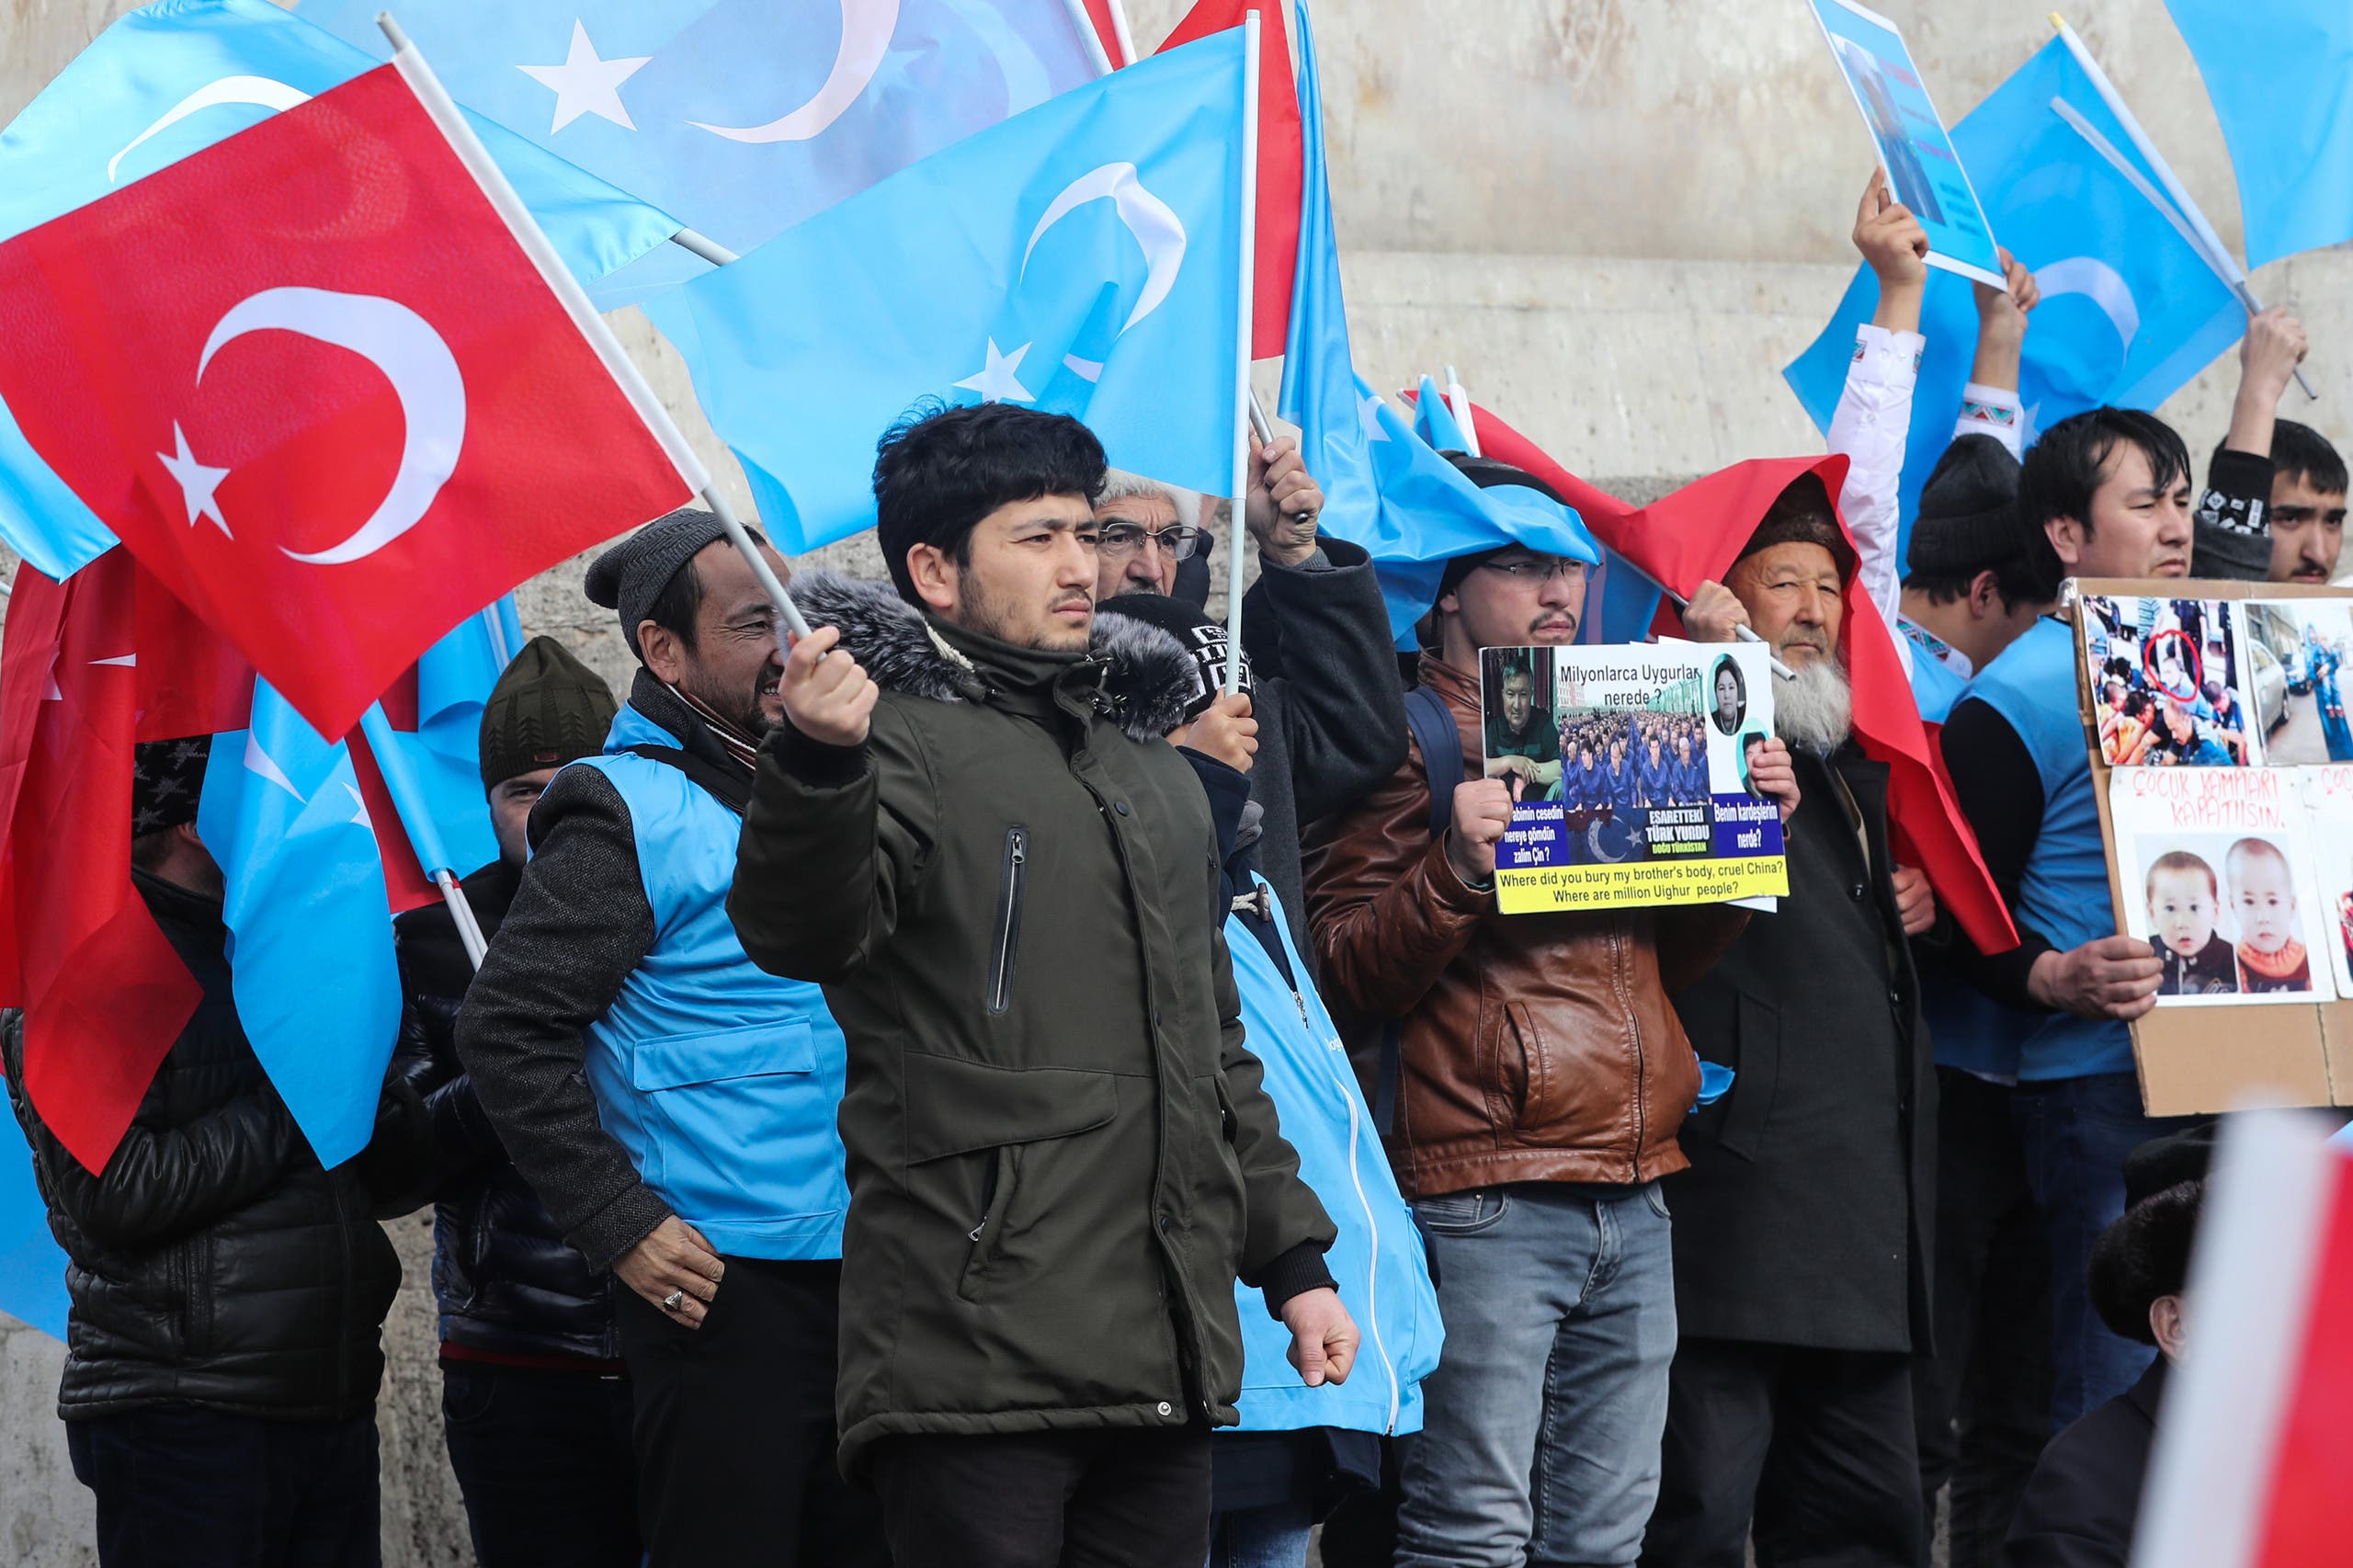 Uighurs living in Turkey stage a demonstration in Ankara on February 5, 2020. (AFP)